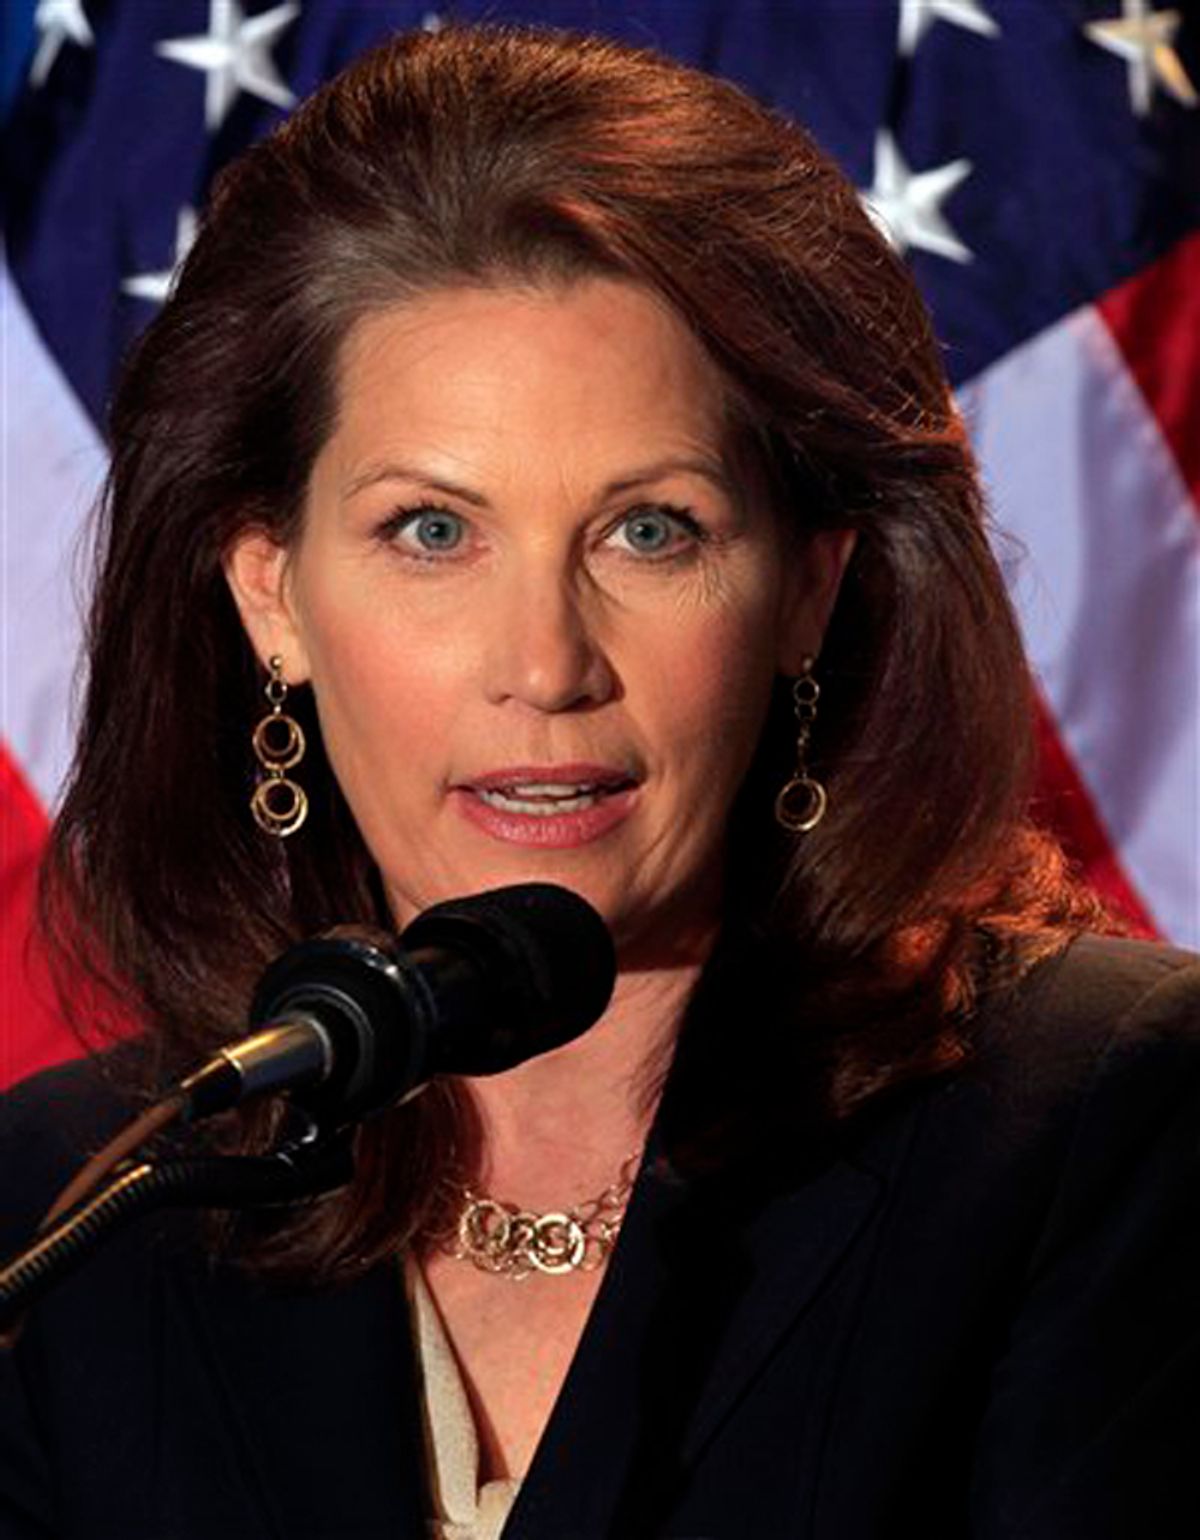 Possible 2012 presidential hopeful, U.S. Rep. Michelle Bachmann, R-Minn. speaks during a dinner sponsored by Americans for Prosperity, Friday, April 29, 2011 in Manchester , N.H. (AP Photo/Jim Cole) (Jim Cole)